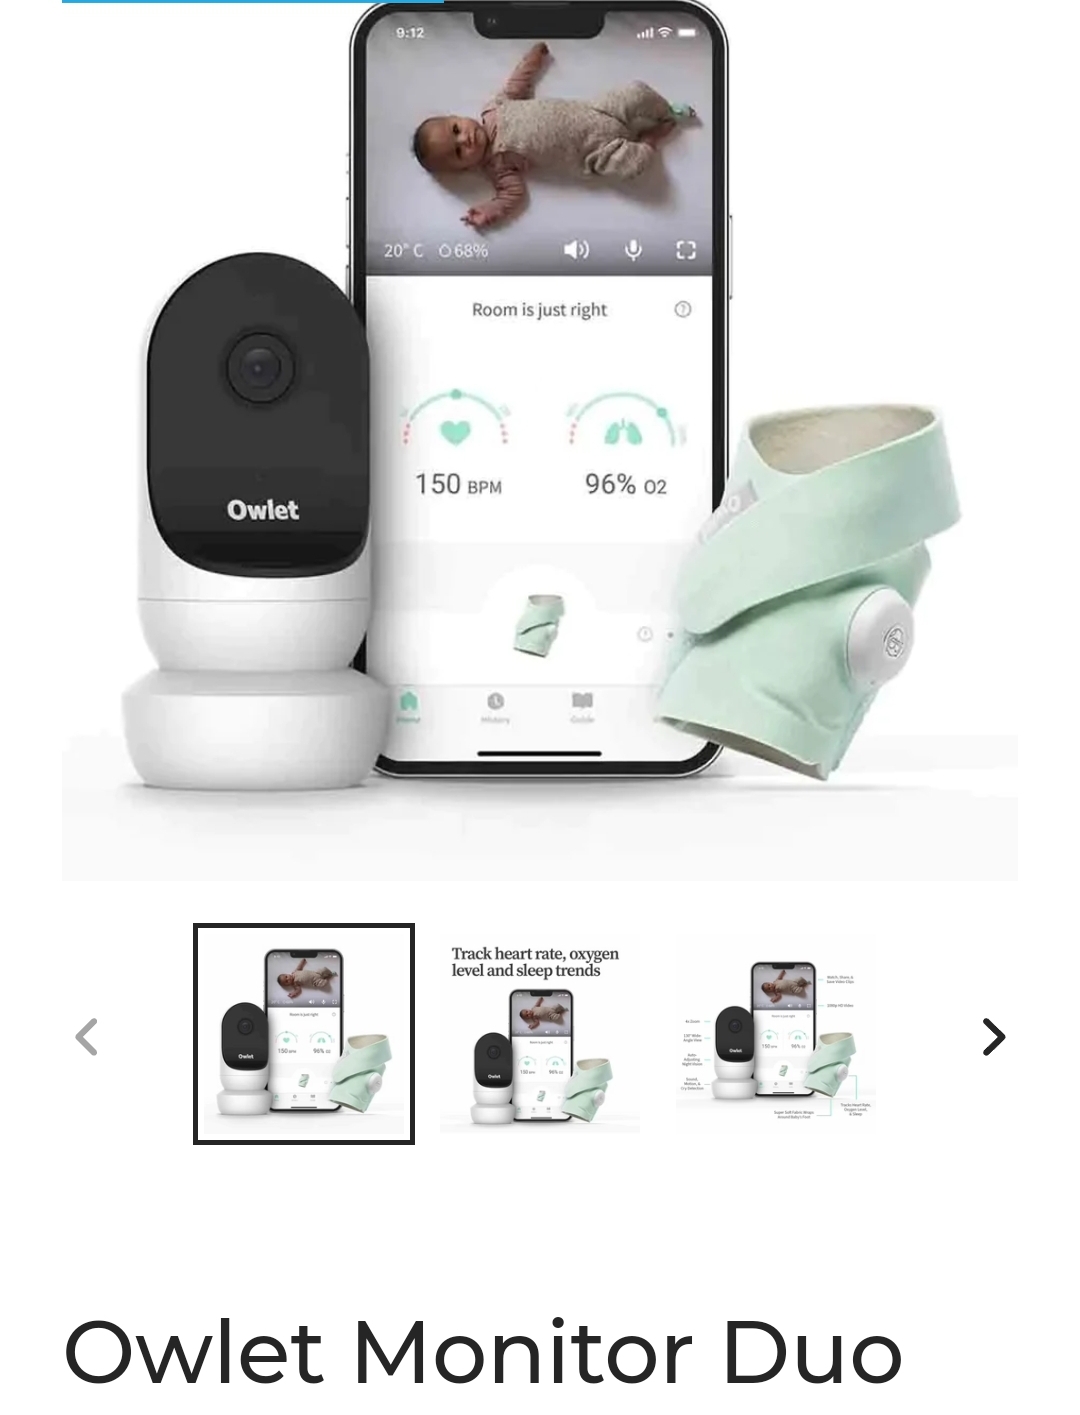 Owelett smart sock (is available on its own or in a camera set)